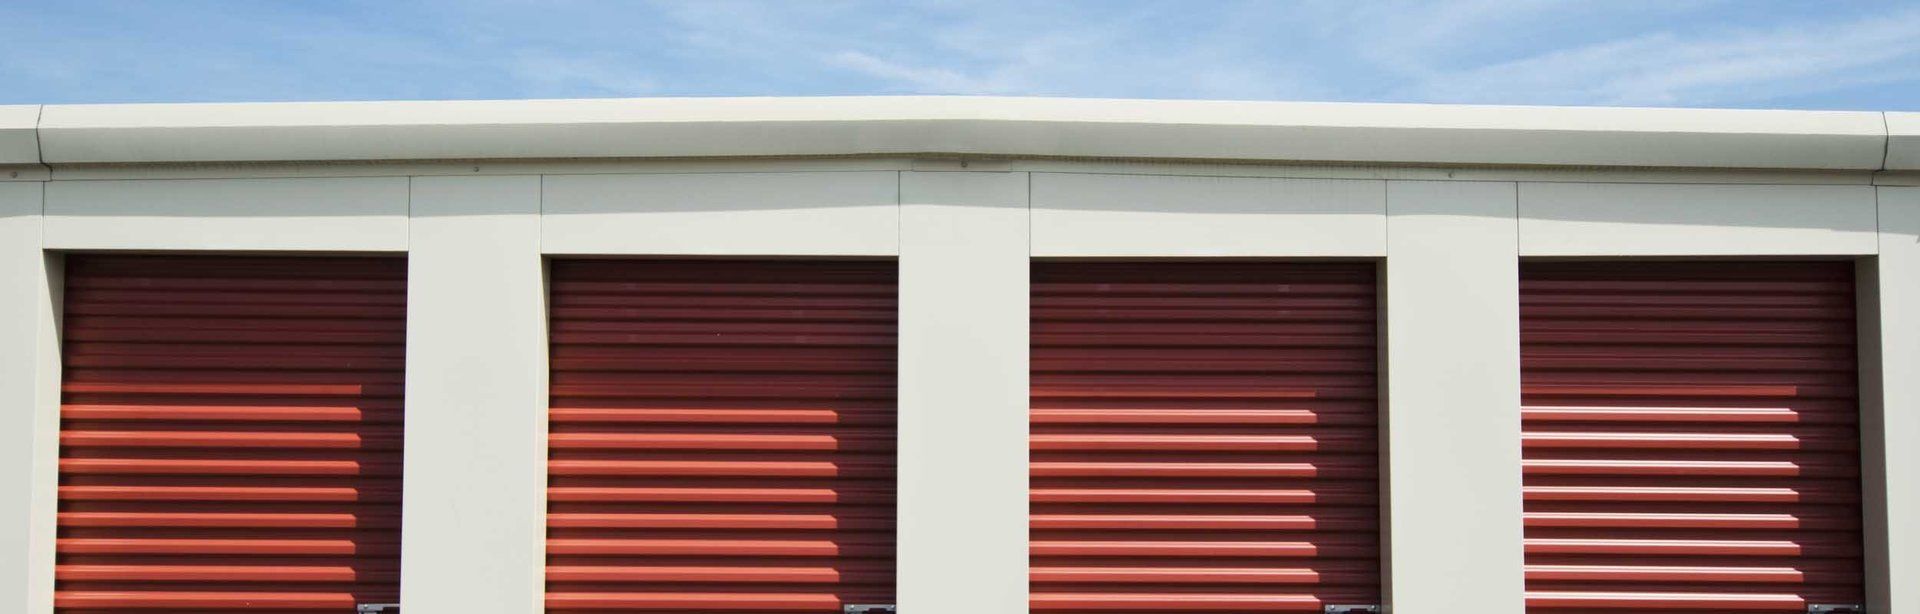 A row of red roller security shutters